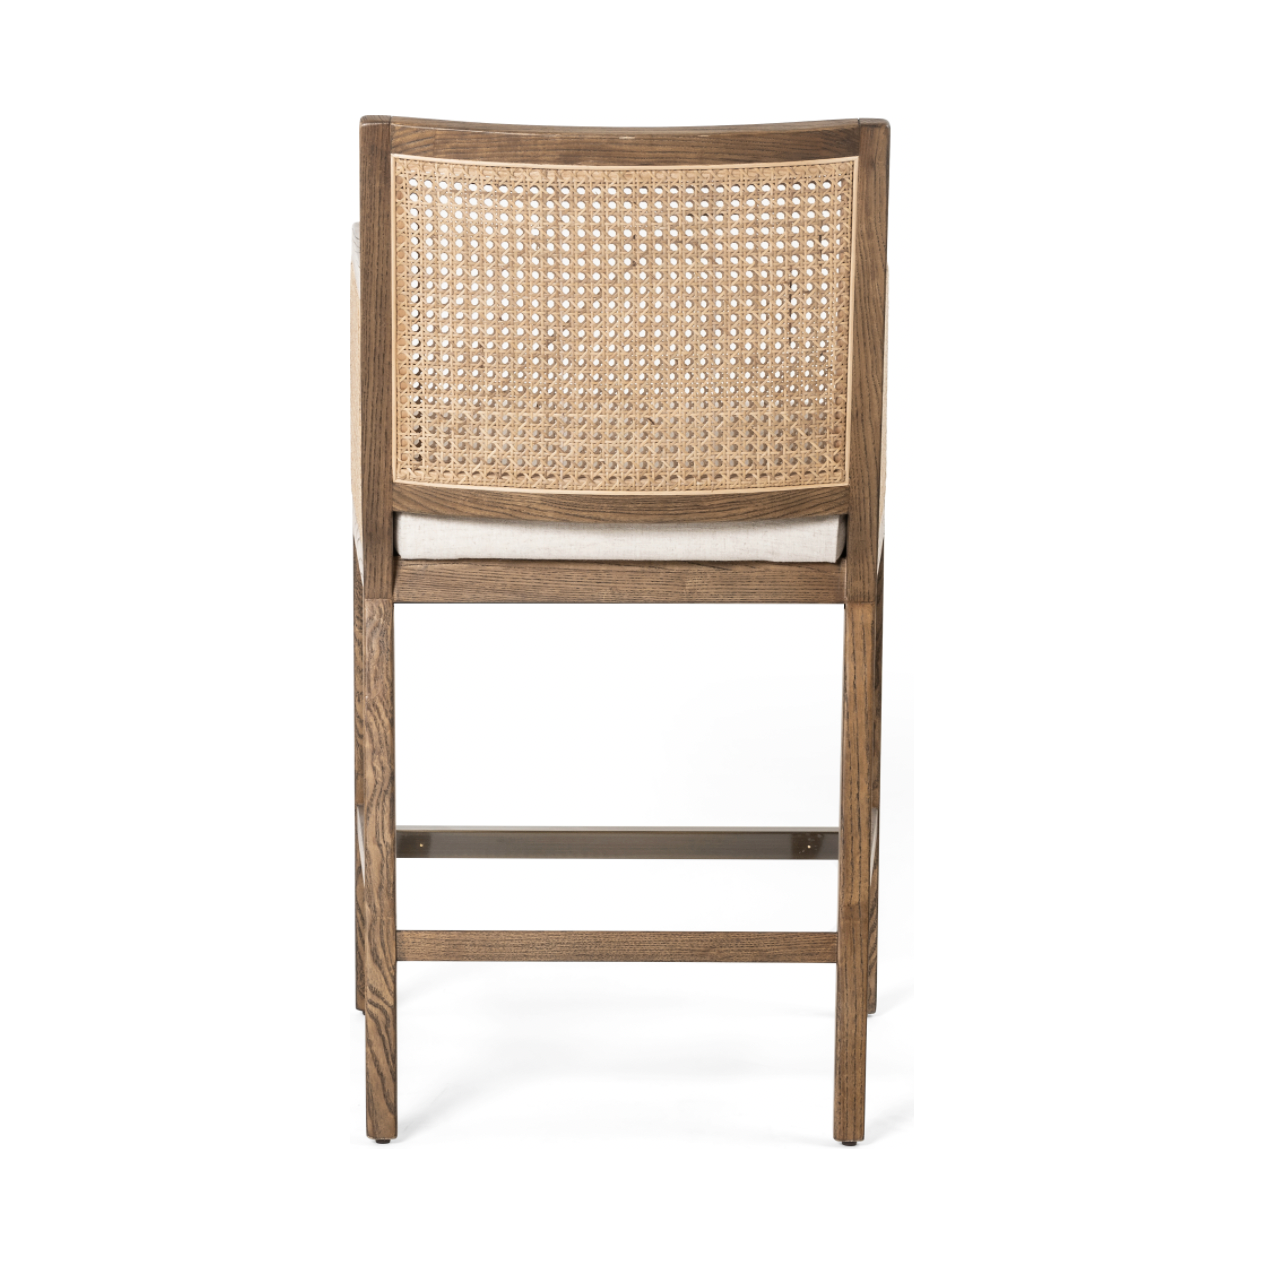 We love the retro look the cane brings to this Antonia Toasted Nettlewood Cane Bar + Counter Stool. A stunning piece to complete a retro or boho aesthetic in any kitchen or bar area. 